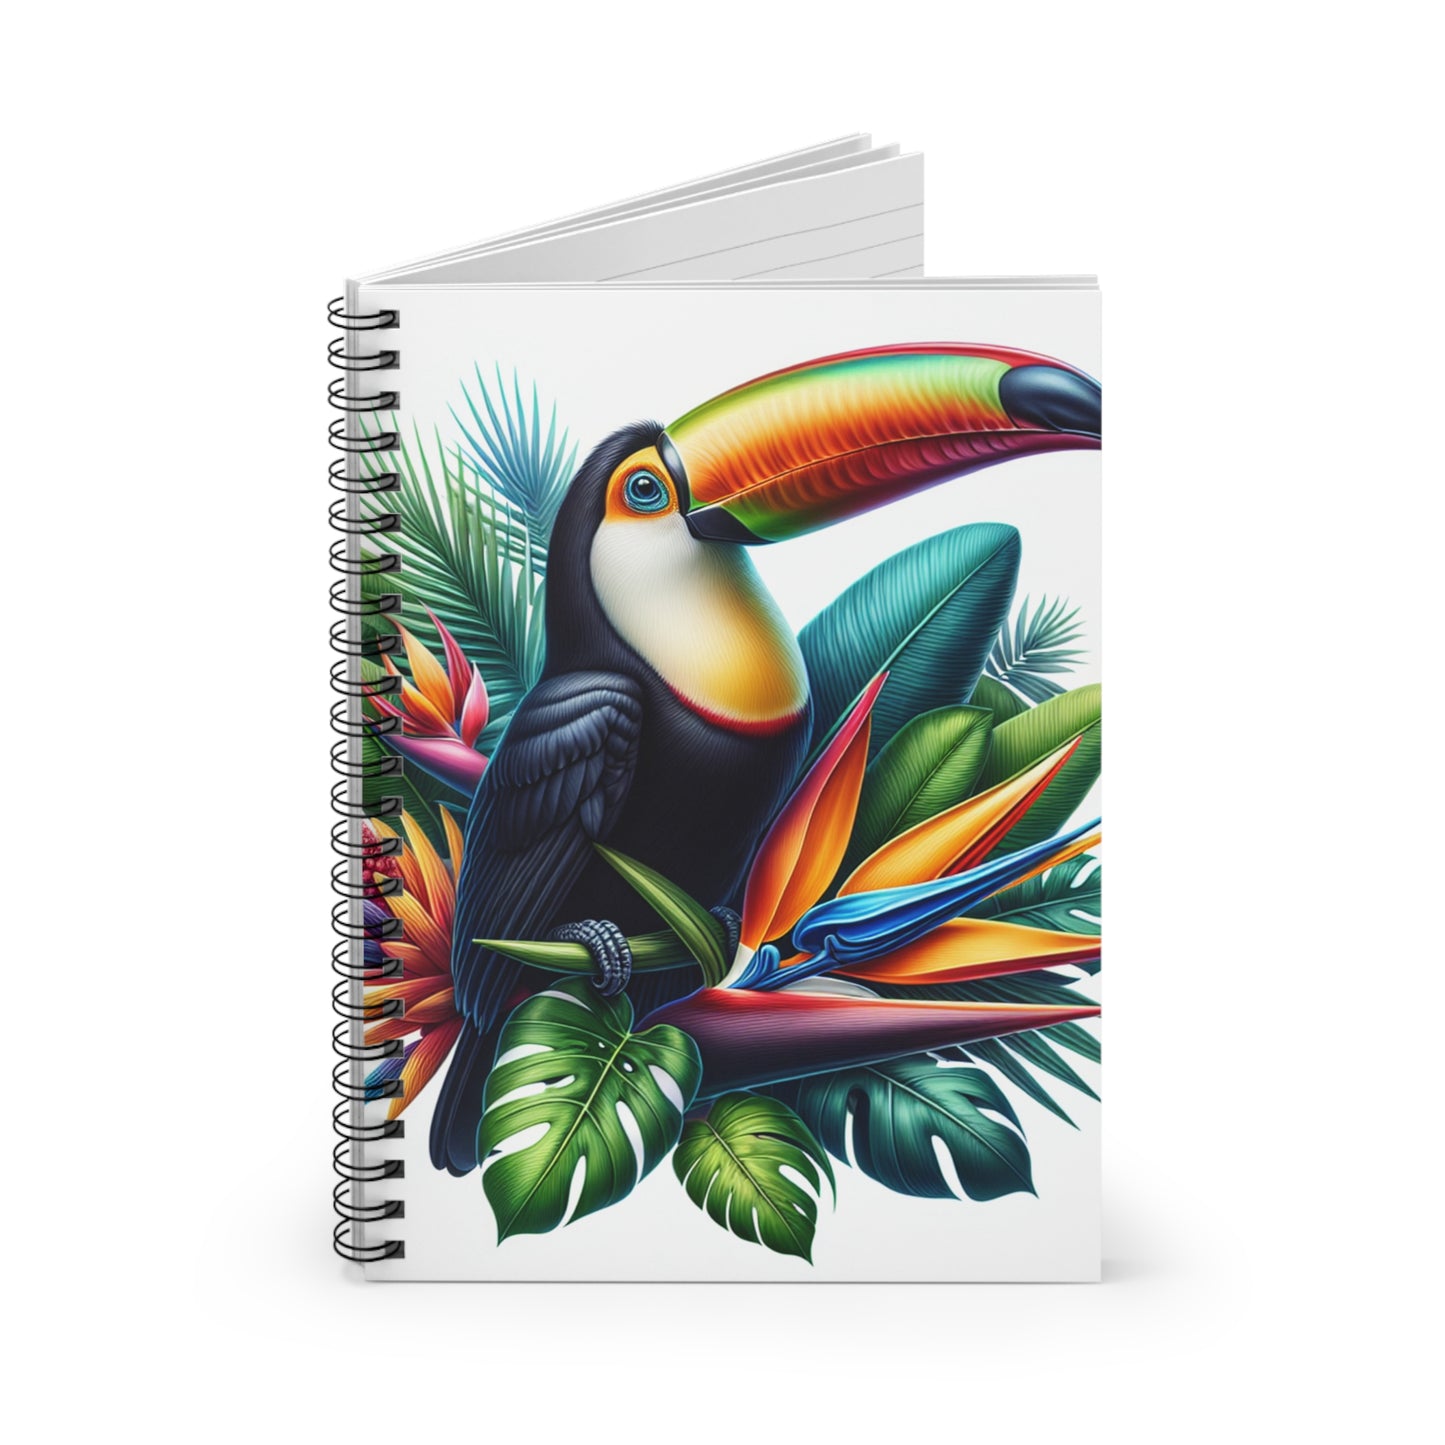 "Toucan on a Tropical Bloom" - The Alien Spiral Notebook (Ruled Line) Hyperrealism Style